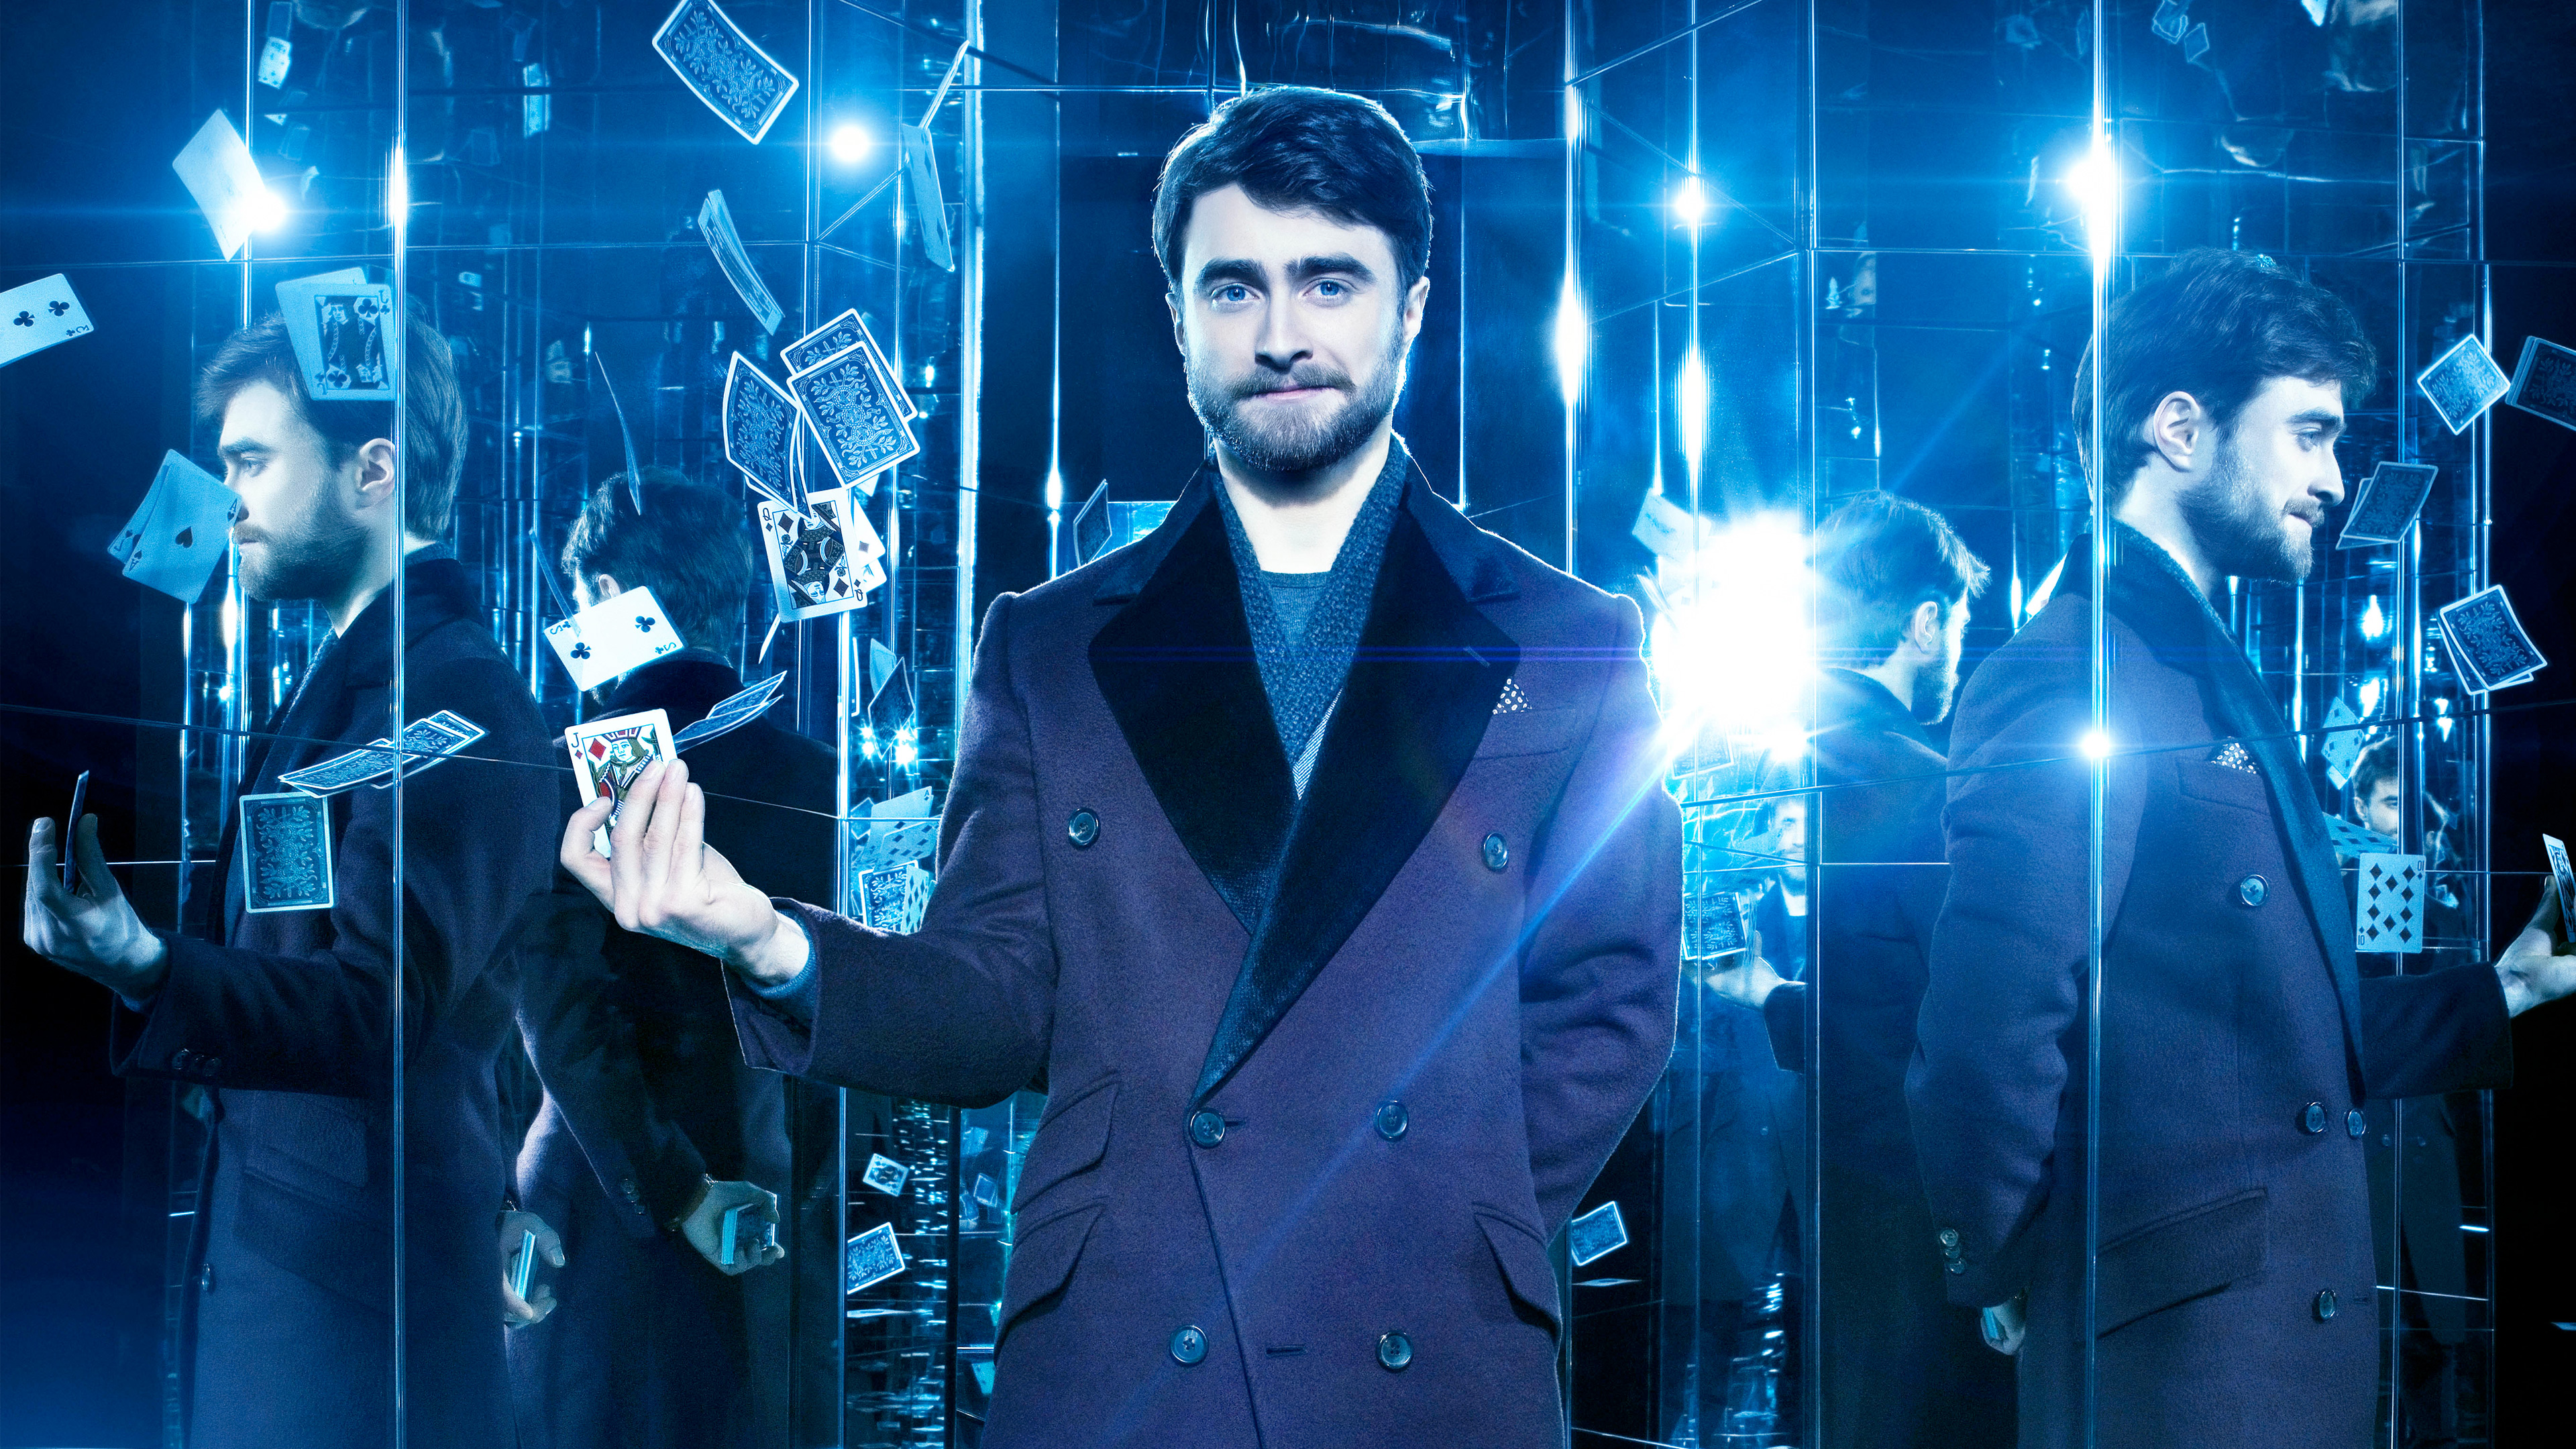 Now You See Me 2 Cards - HD Wallpaper 